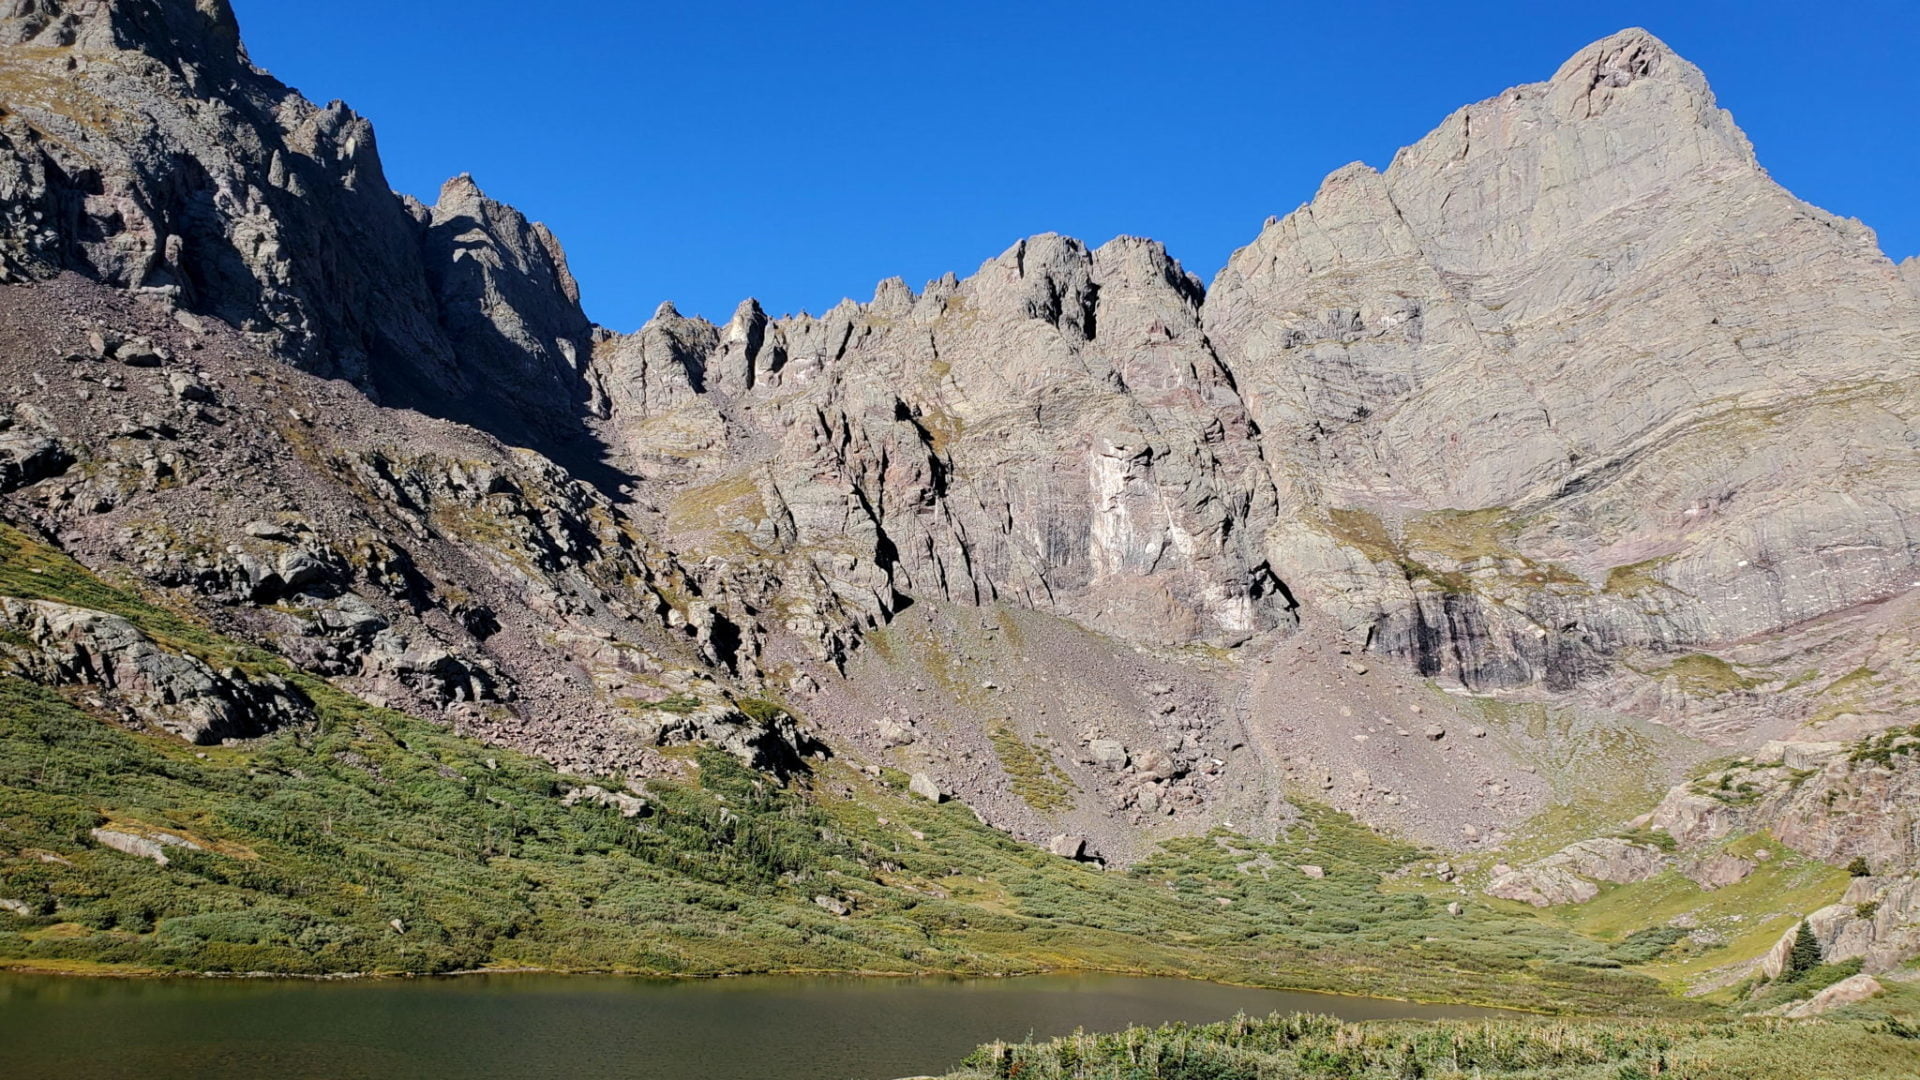 View of Crestone Needle from the Lake